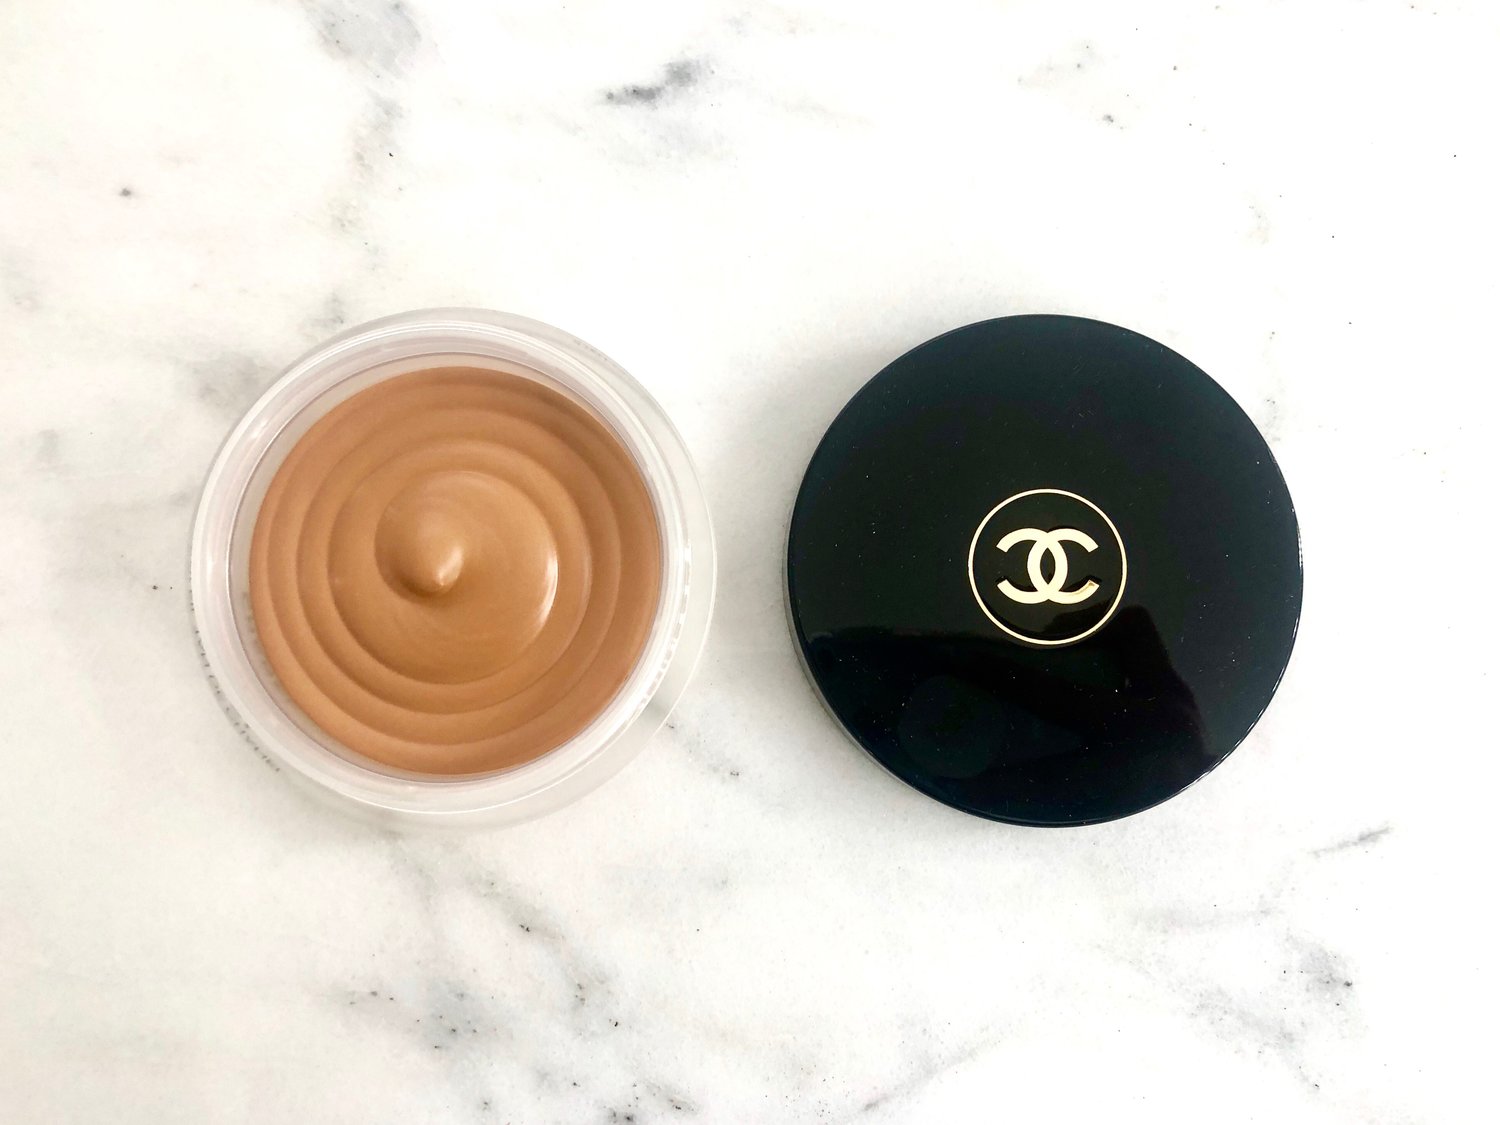 Chanel Sable Beige and Sable Rose Soleil Tan de Chanel Bronzers